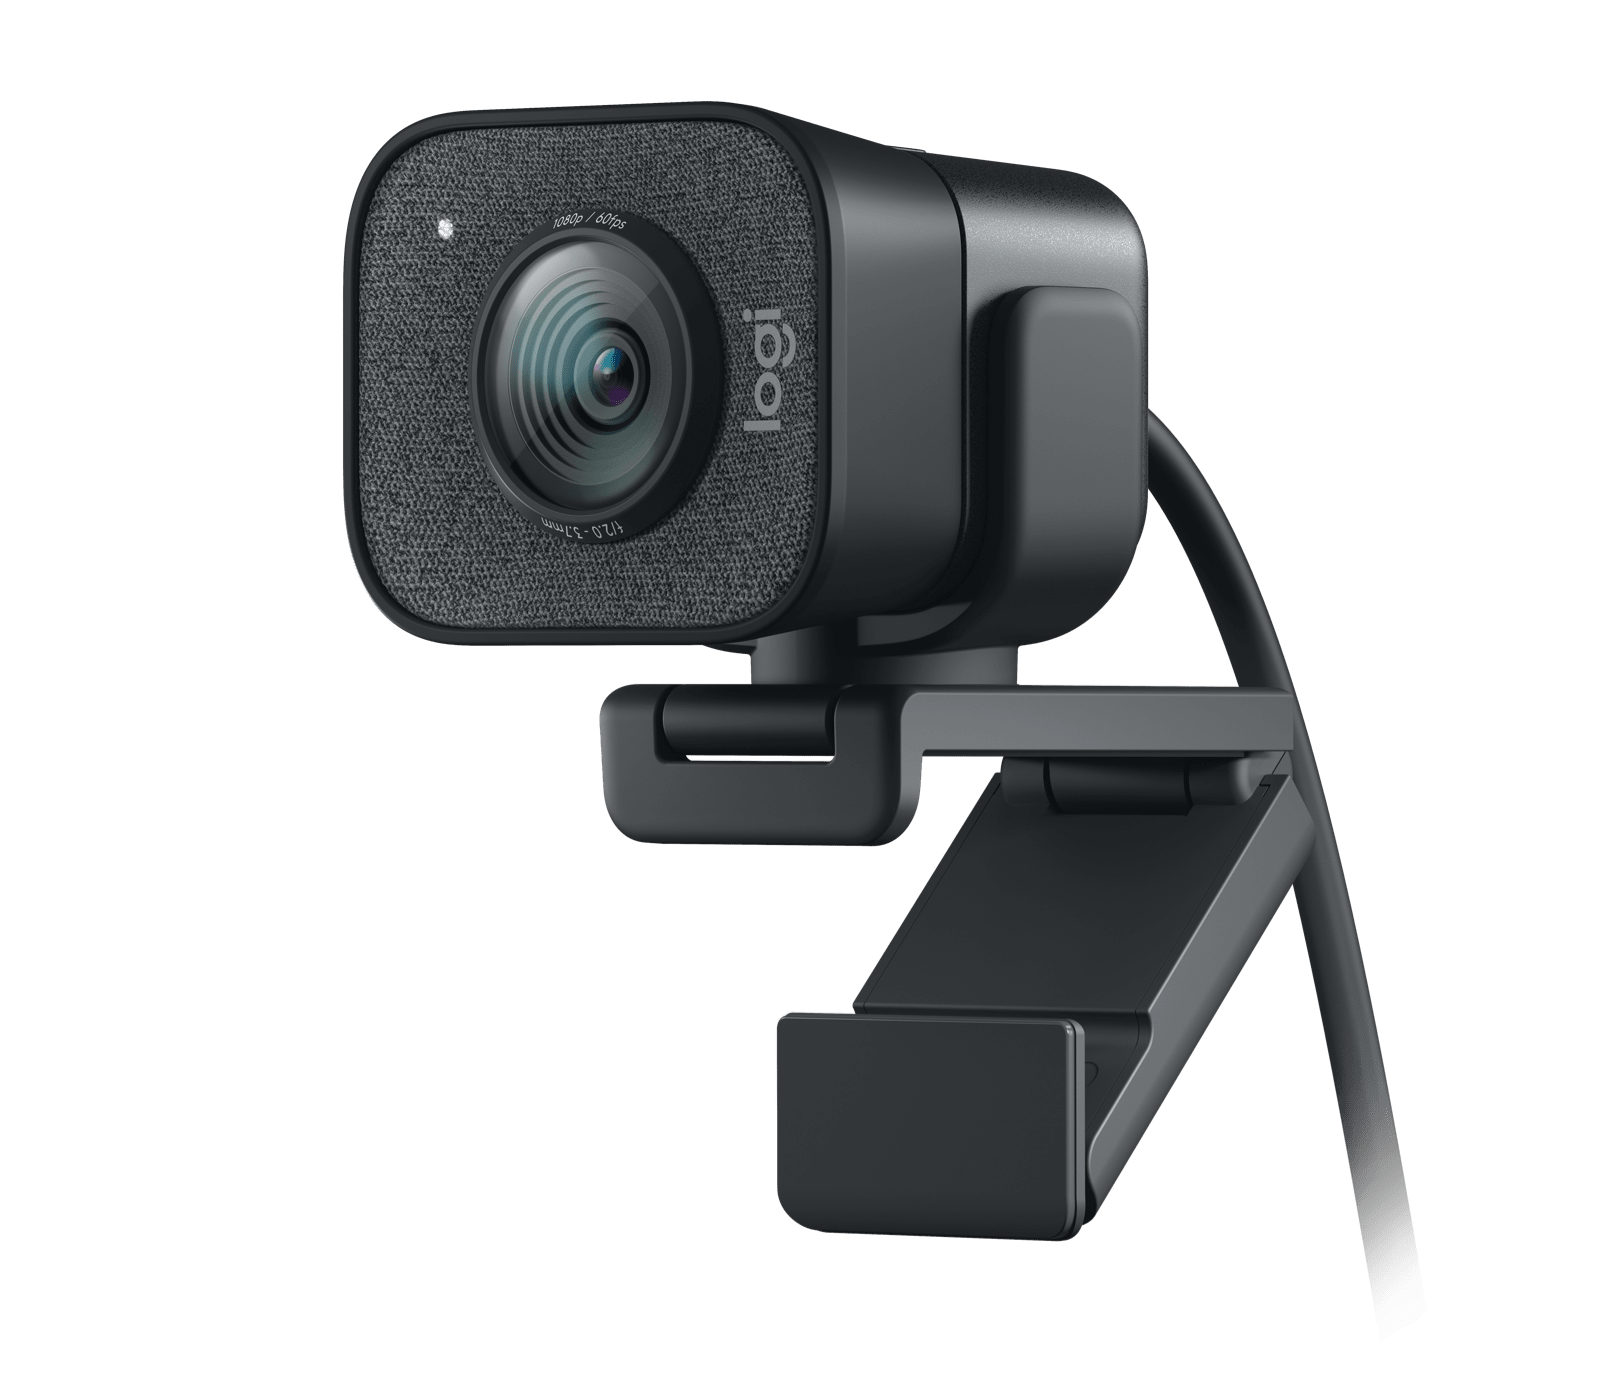 LOGITECH STREAMCAM 1080P HD,BUILT IN MIC,AUTO FOCUS,USB-C,GRAPHITE,, Full HD camera with USB-C for live streaming and content creation